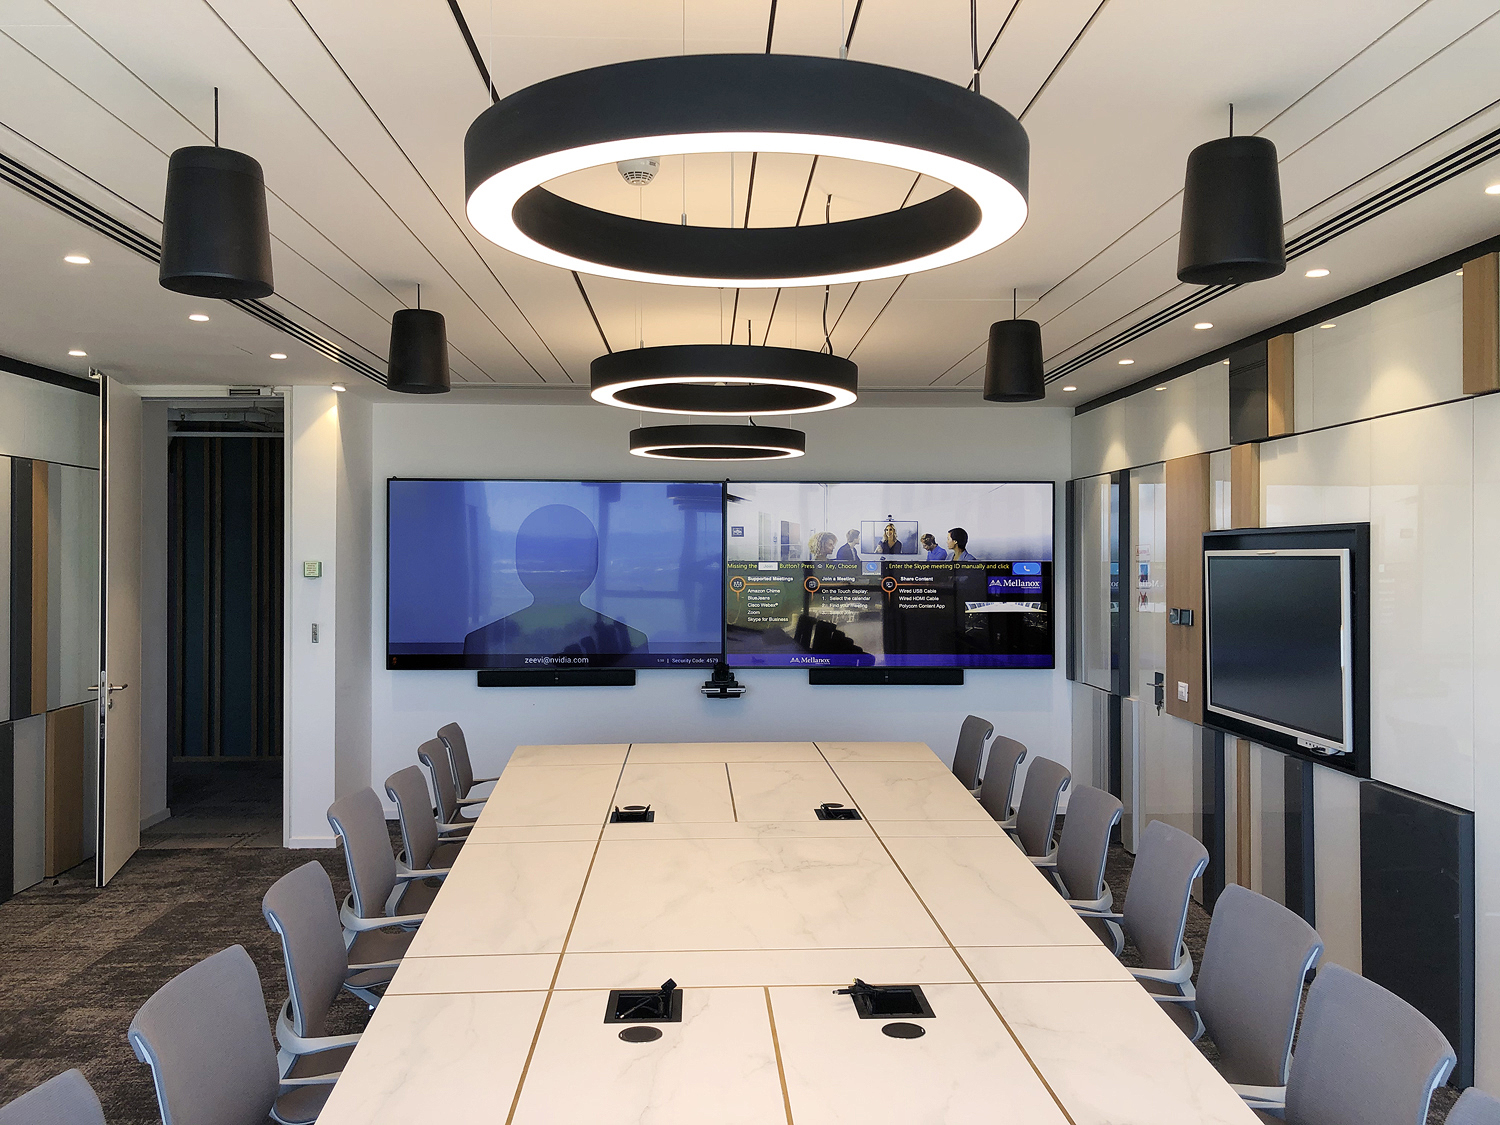 Each meeting room was designed to invoke quiet professionalism, with an elegant conference table, indirect lighting, and Extron SF 26PT pendant speakers in black.